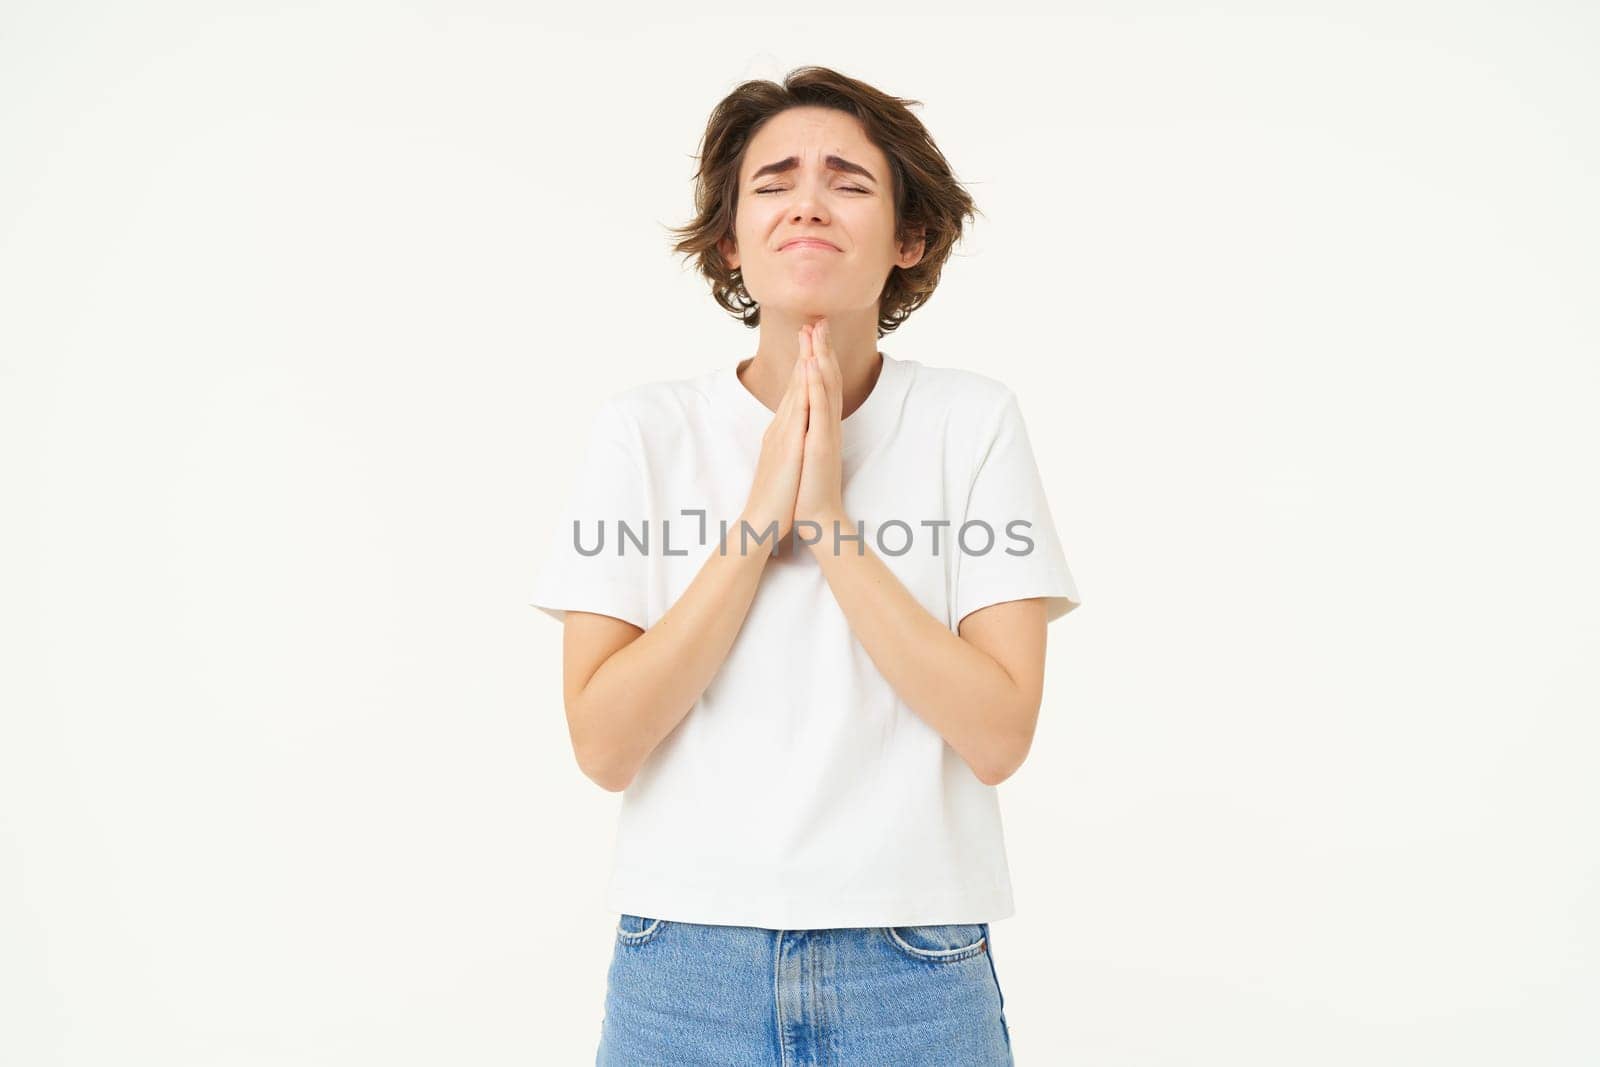 Desperate woman praying, begging for help, pleading, making wish, standing over white background.